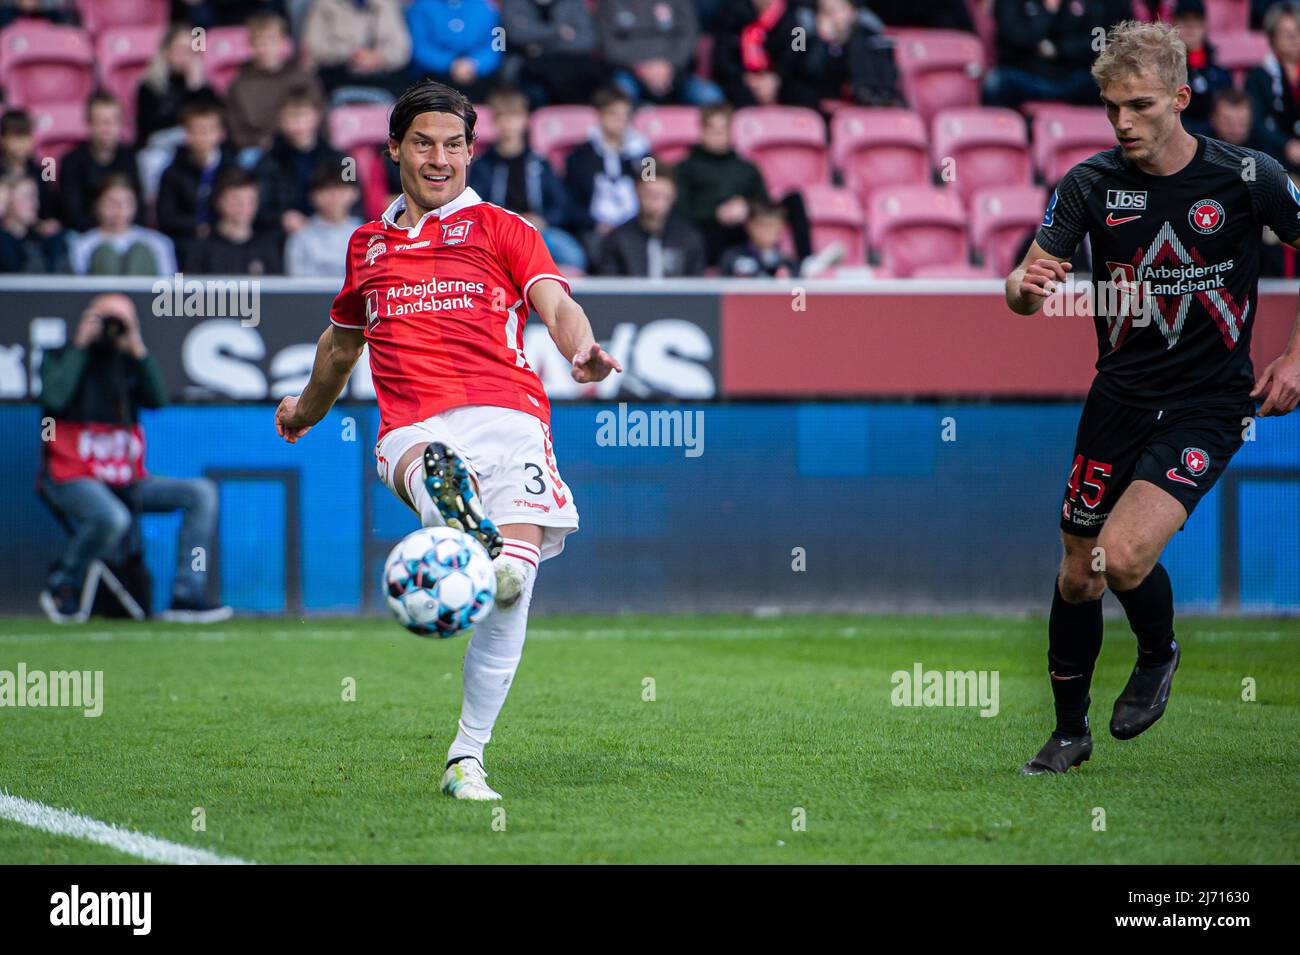 Herning, Denmark. 04th, May 2022. Miiko Albornoz (3) of Vejle Boldklub seen during the Sydbank Cup match between FC Midtjylland and Vejle Boldklub at MCH Arena in Herning. (Photo credit: Gonzales Photo - Morten Kjaer). Stock Photo